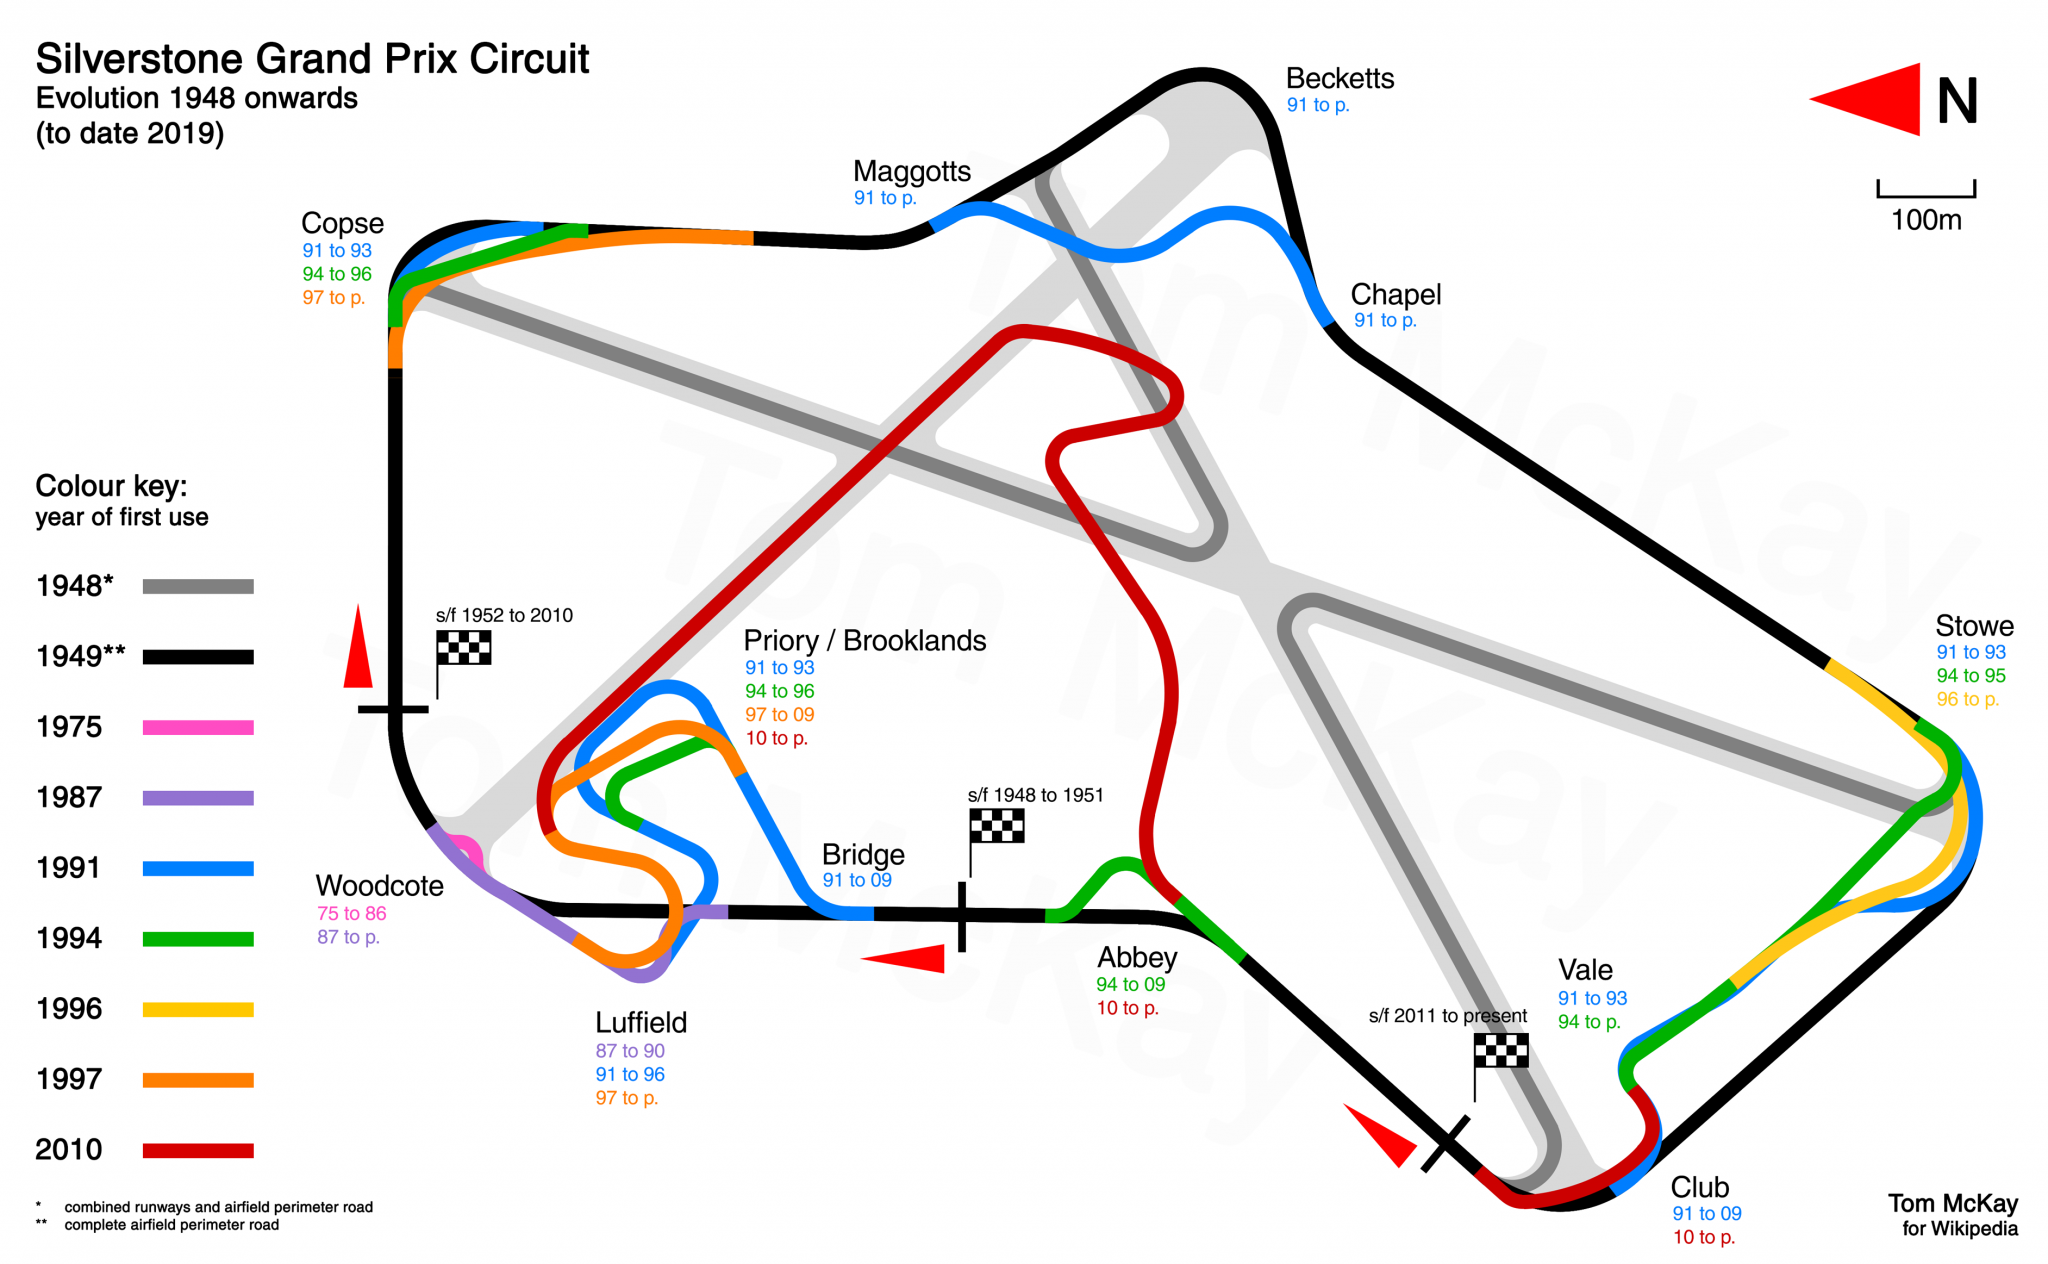 Evolution_of_Silverstone_Grand_Prix_Circuit_1949_to_present.png